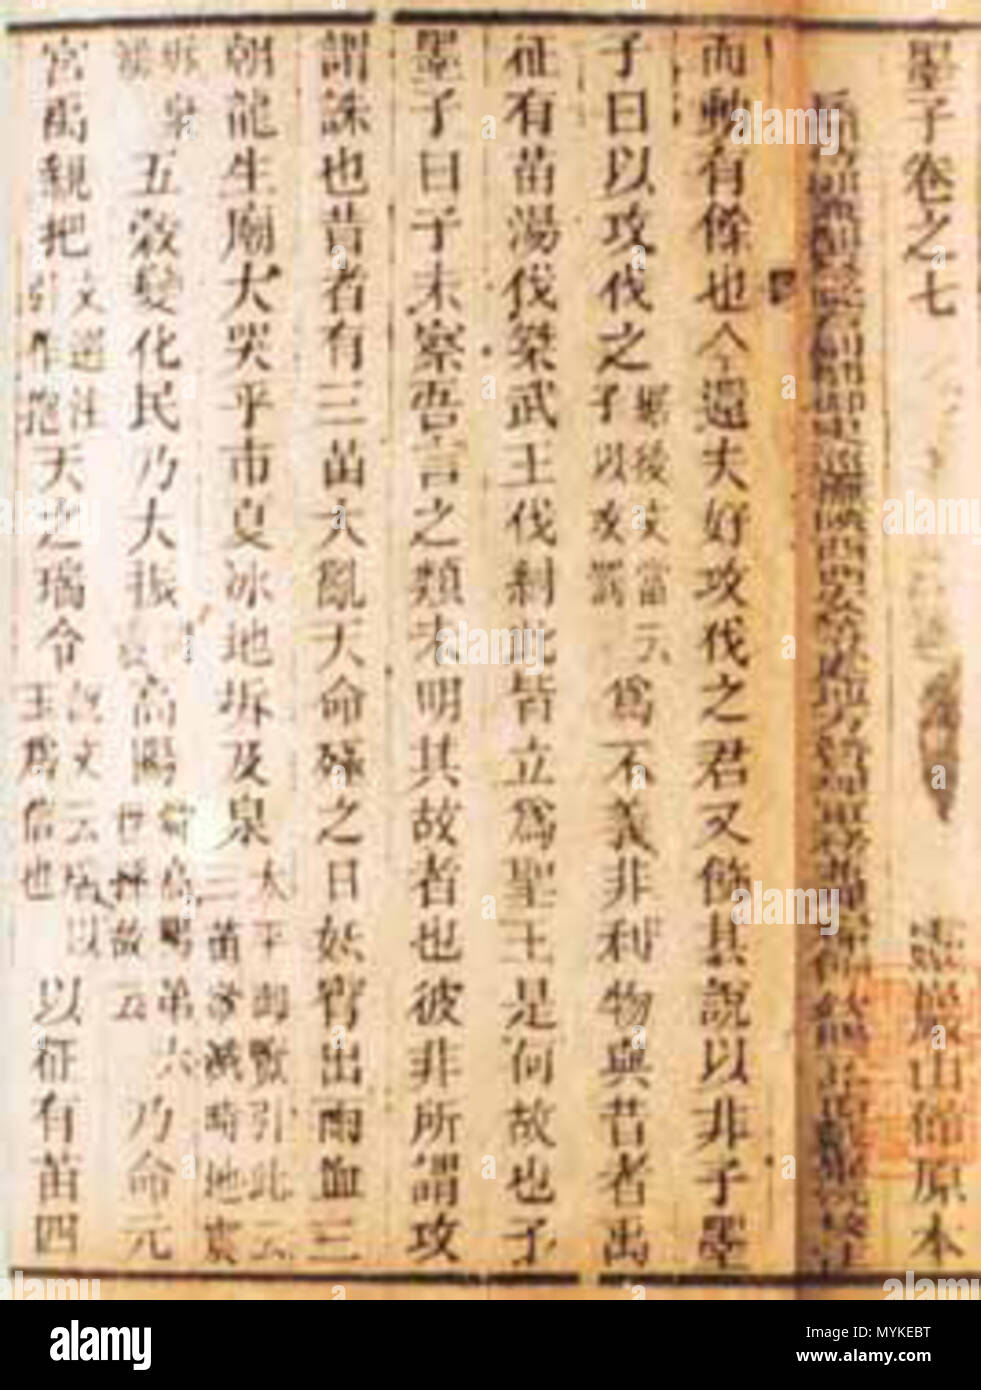 . English: Text of 7th volume of Mozi (墨子卷之七), as wrote at upper-right Français : texte du 7e volume du Mozi (墨子卷之七), comme écrit en haut à droite 中文: 墨子卷之七 . 22 May 2008. Iflwlou 372 Mozi Stock Photo